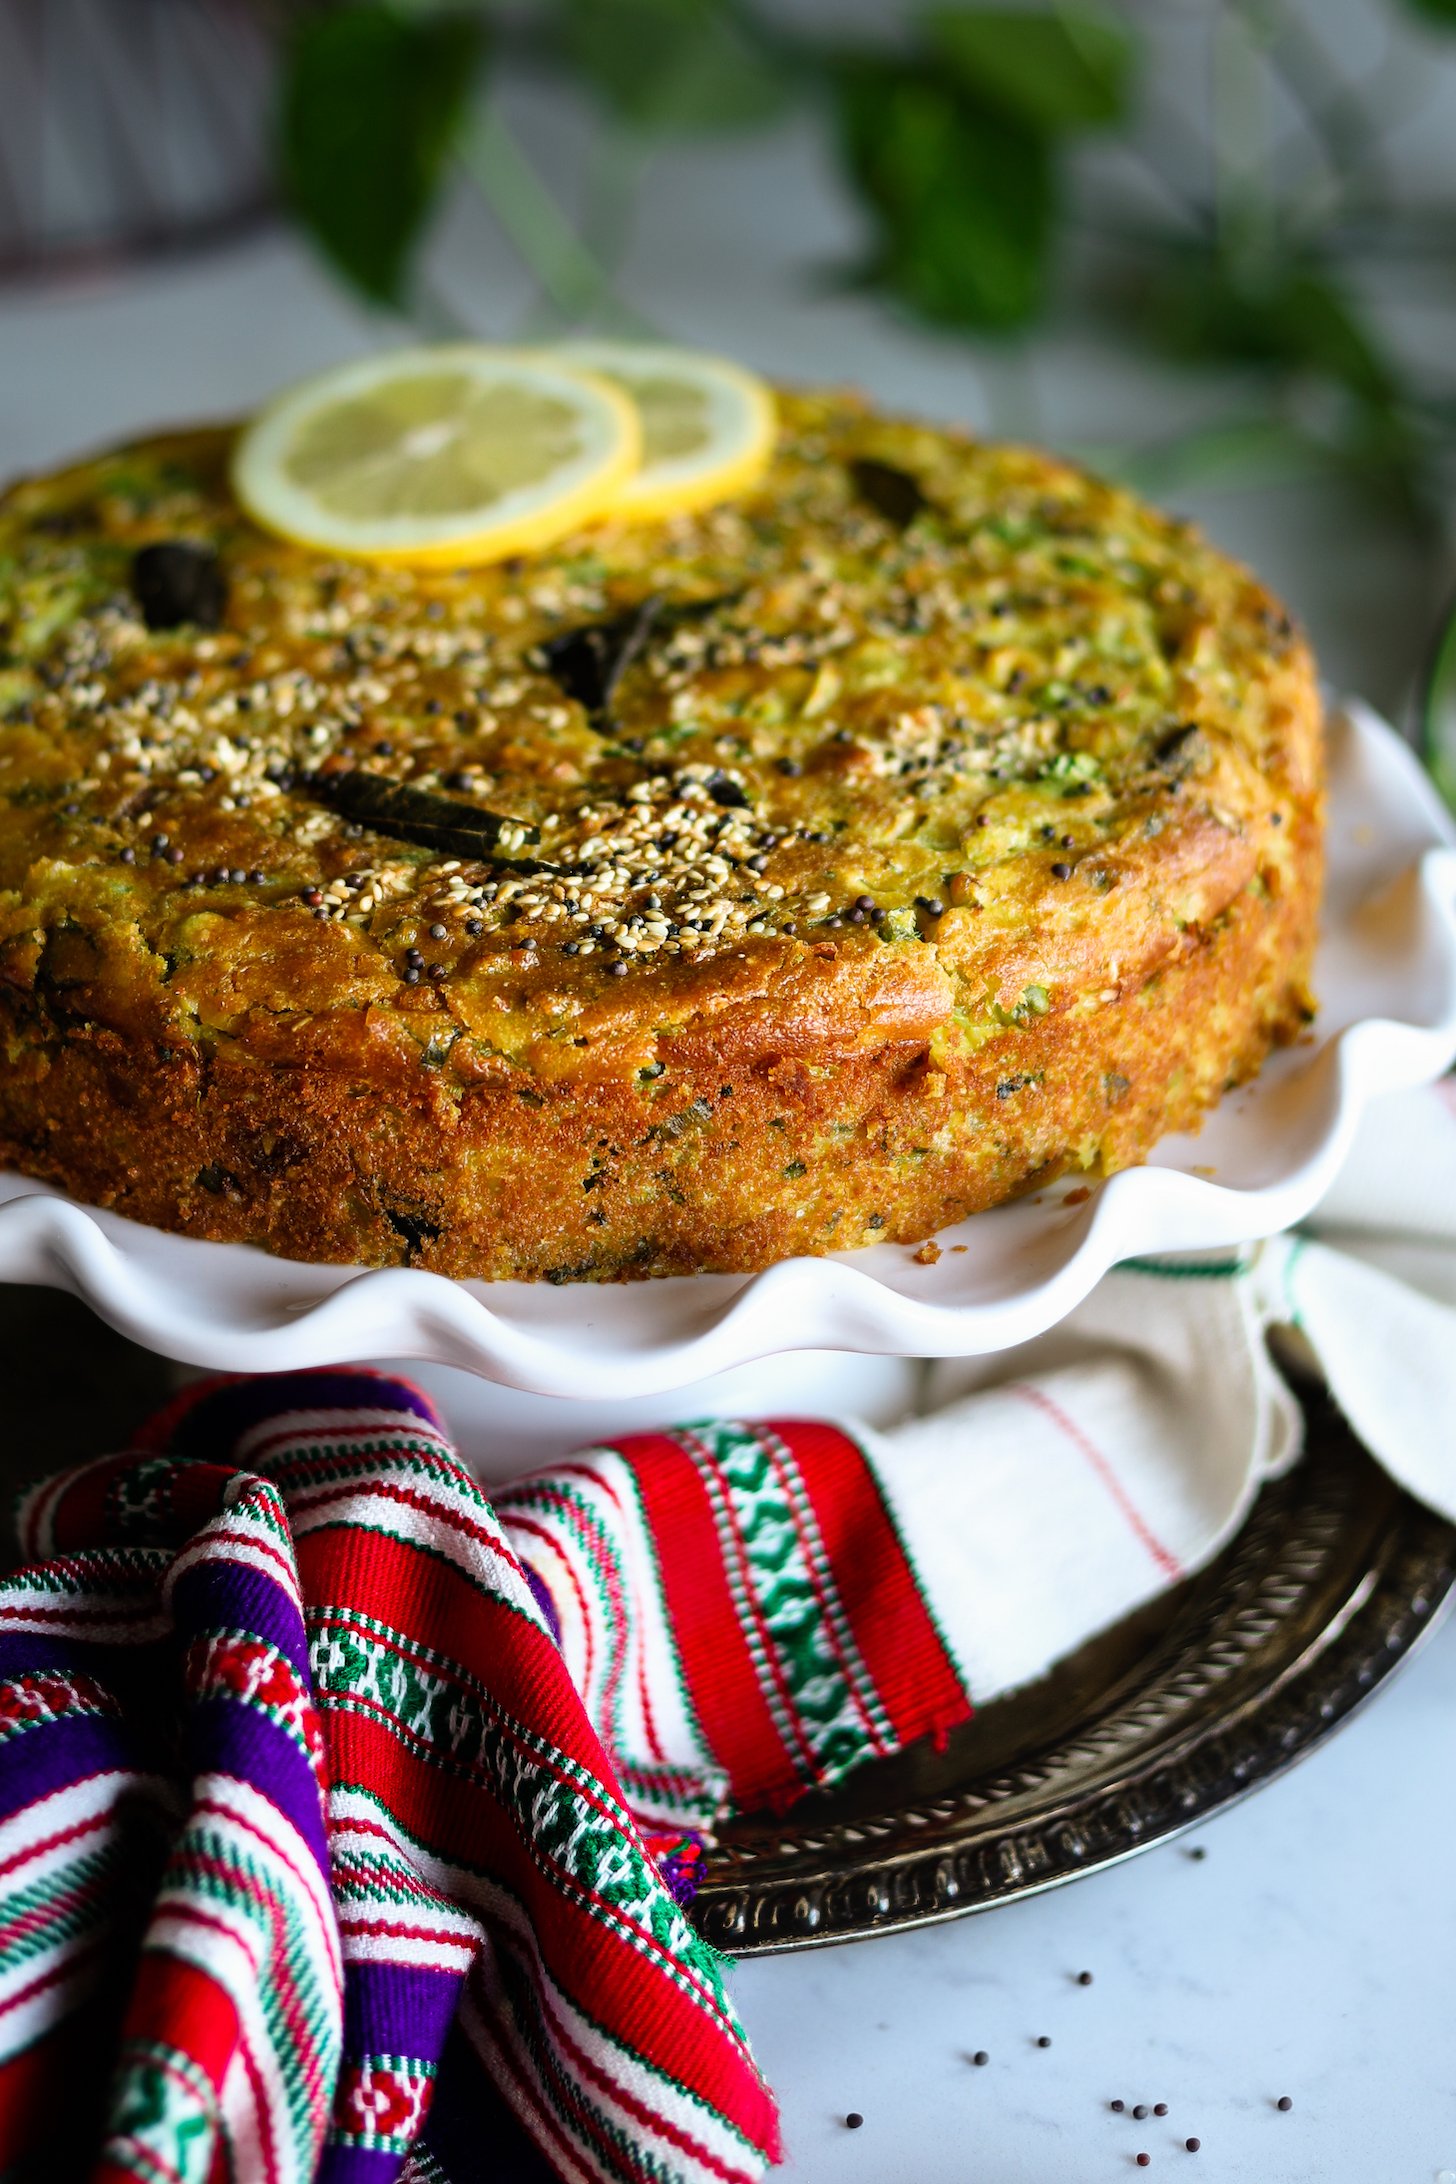 Side view of a yellow cake topped with seeds and leaves and lemon slices.